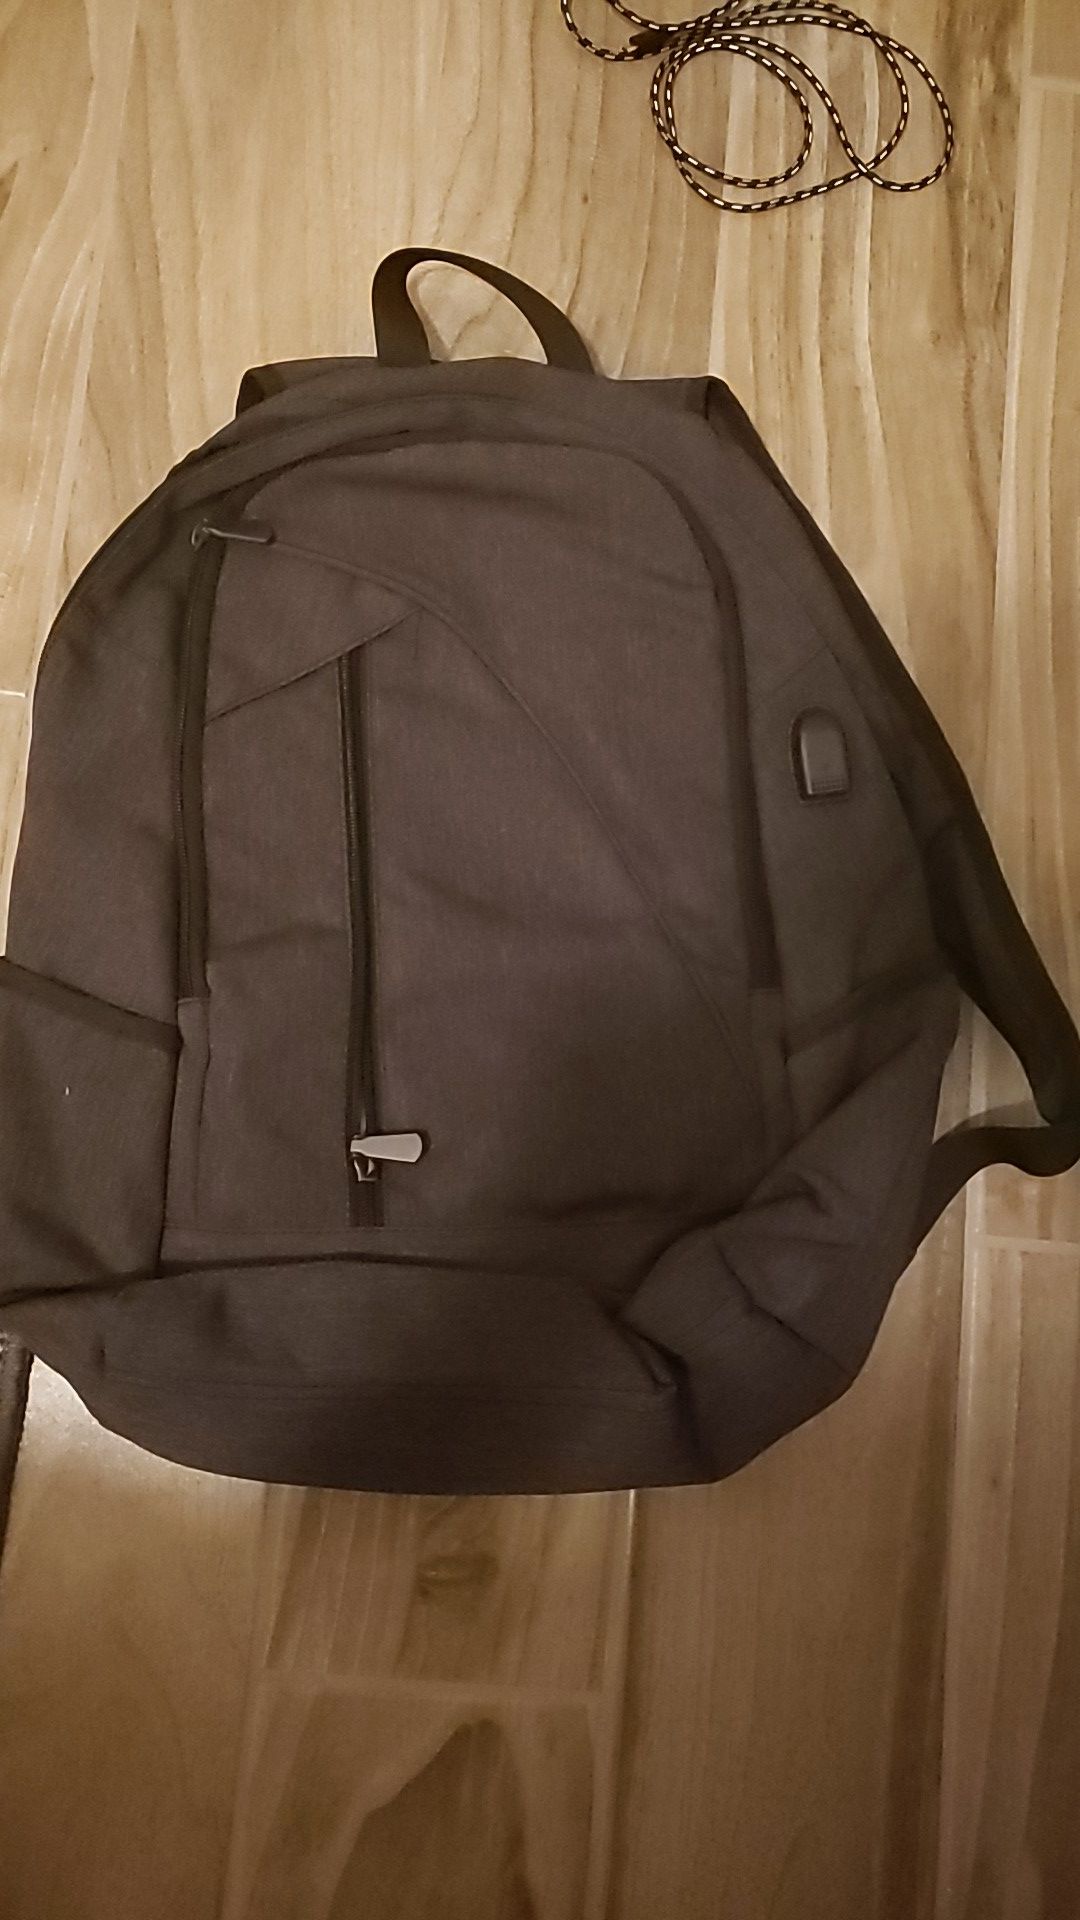 Backpack with Phone Charger